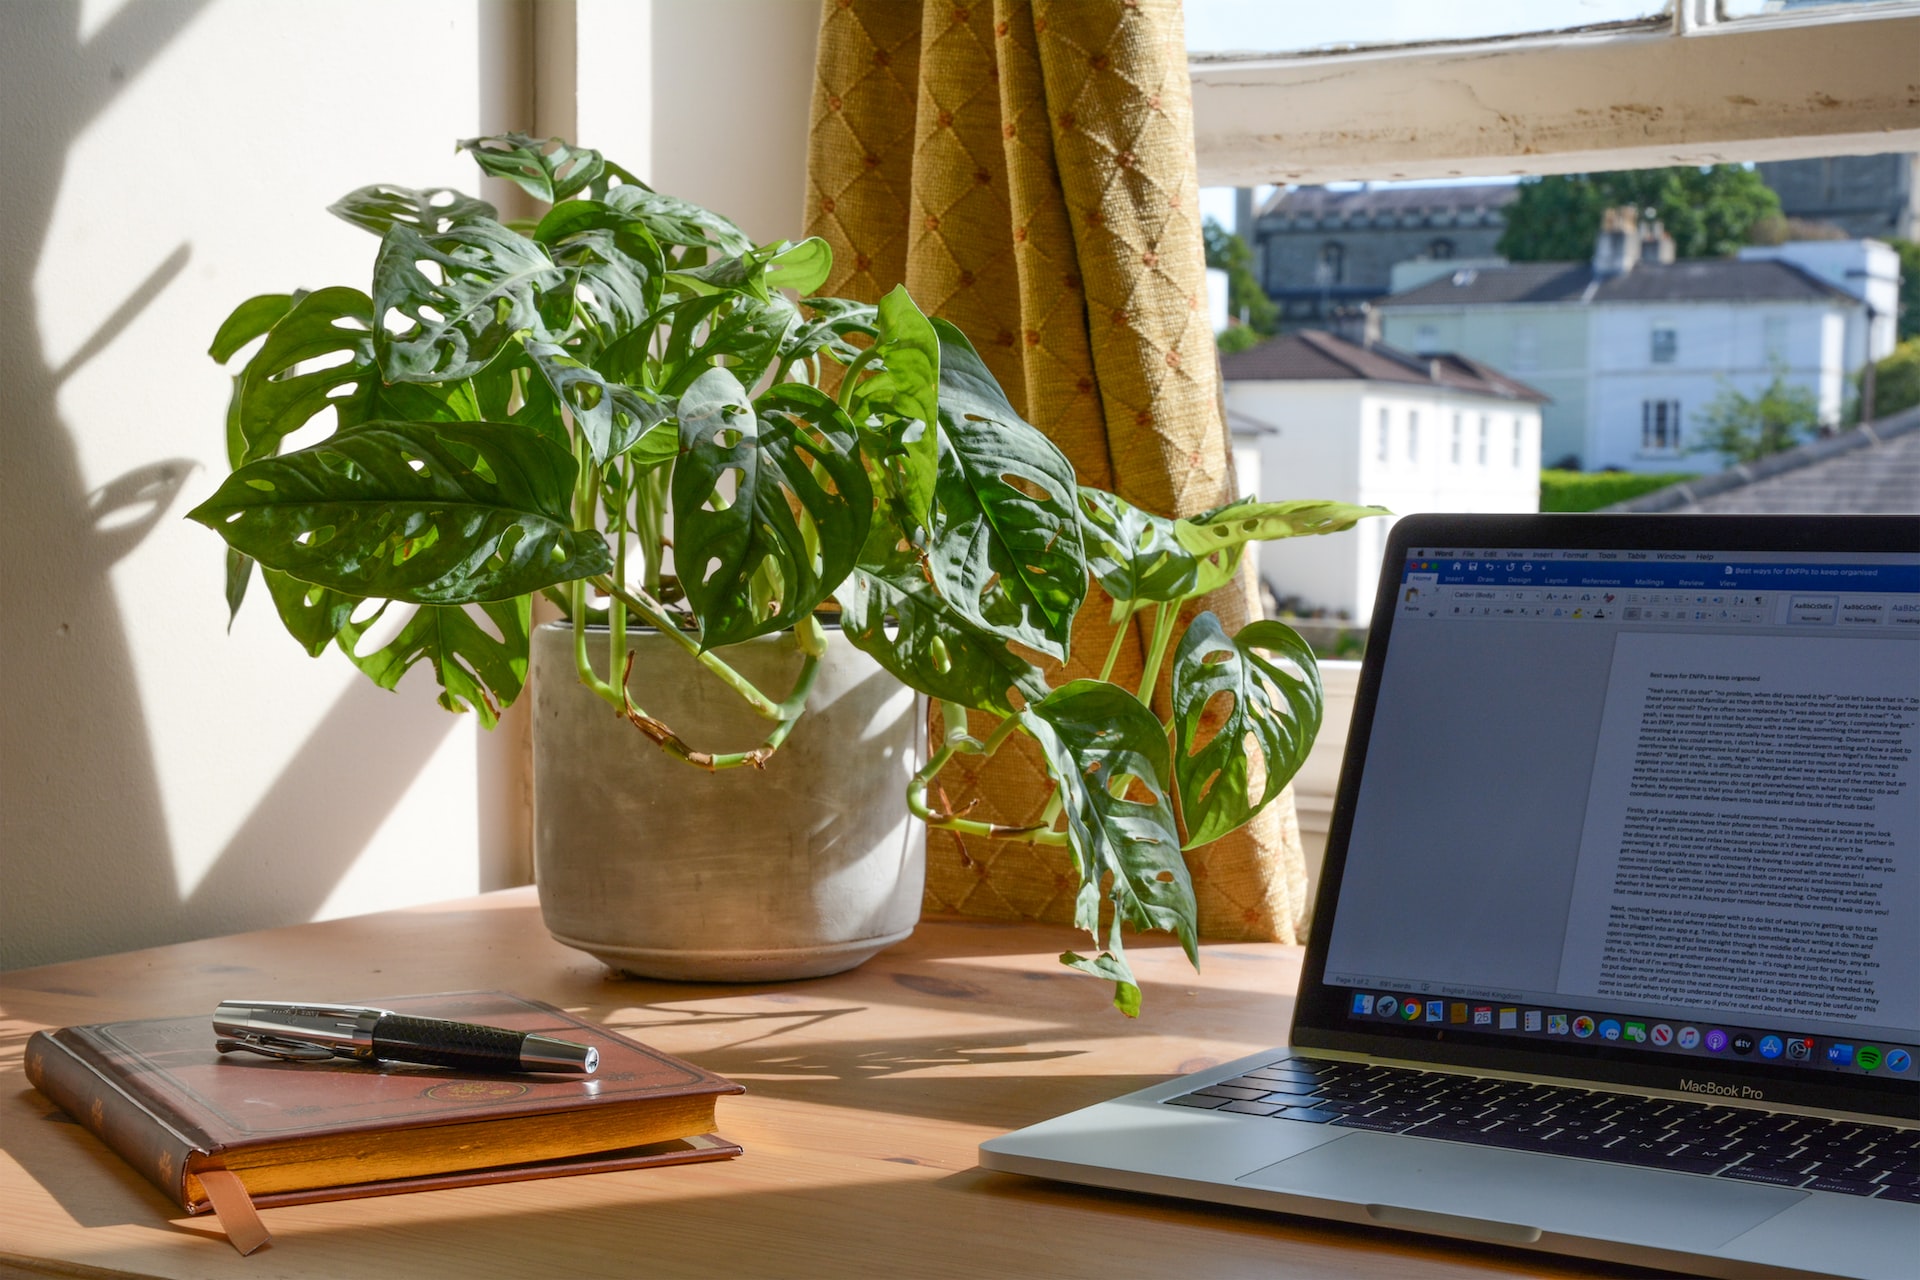 Potted plant next to a laptop on top of a desk.